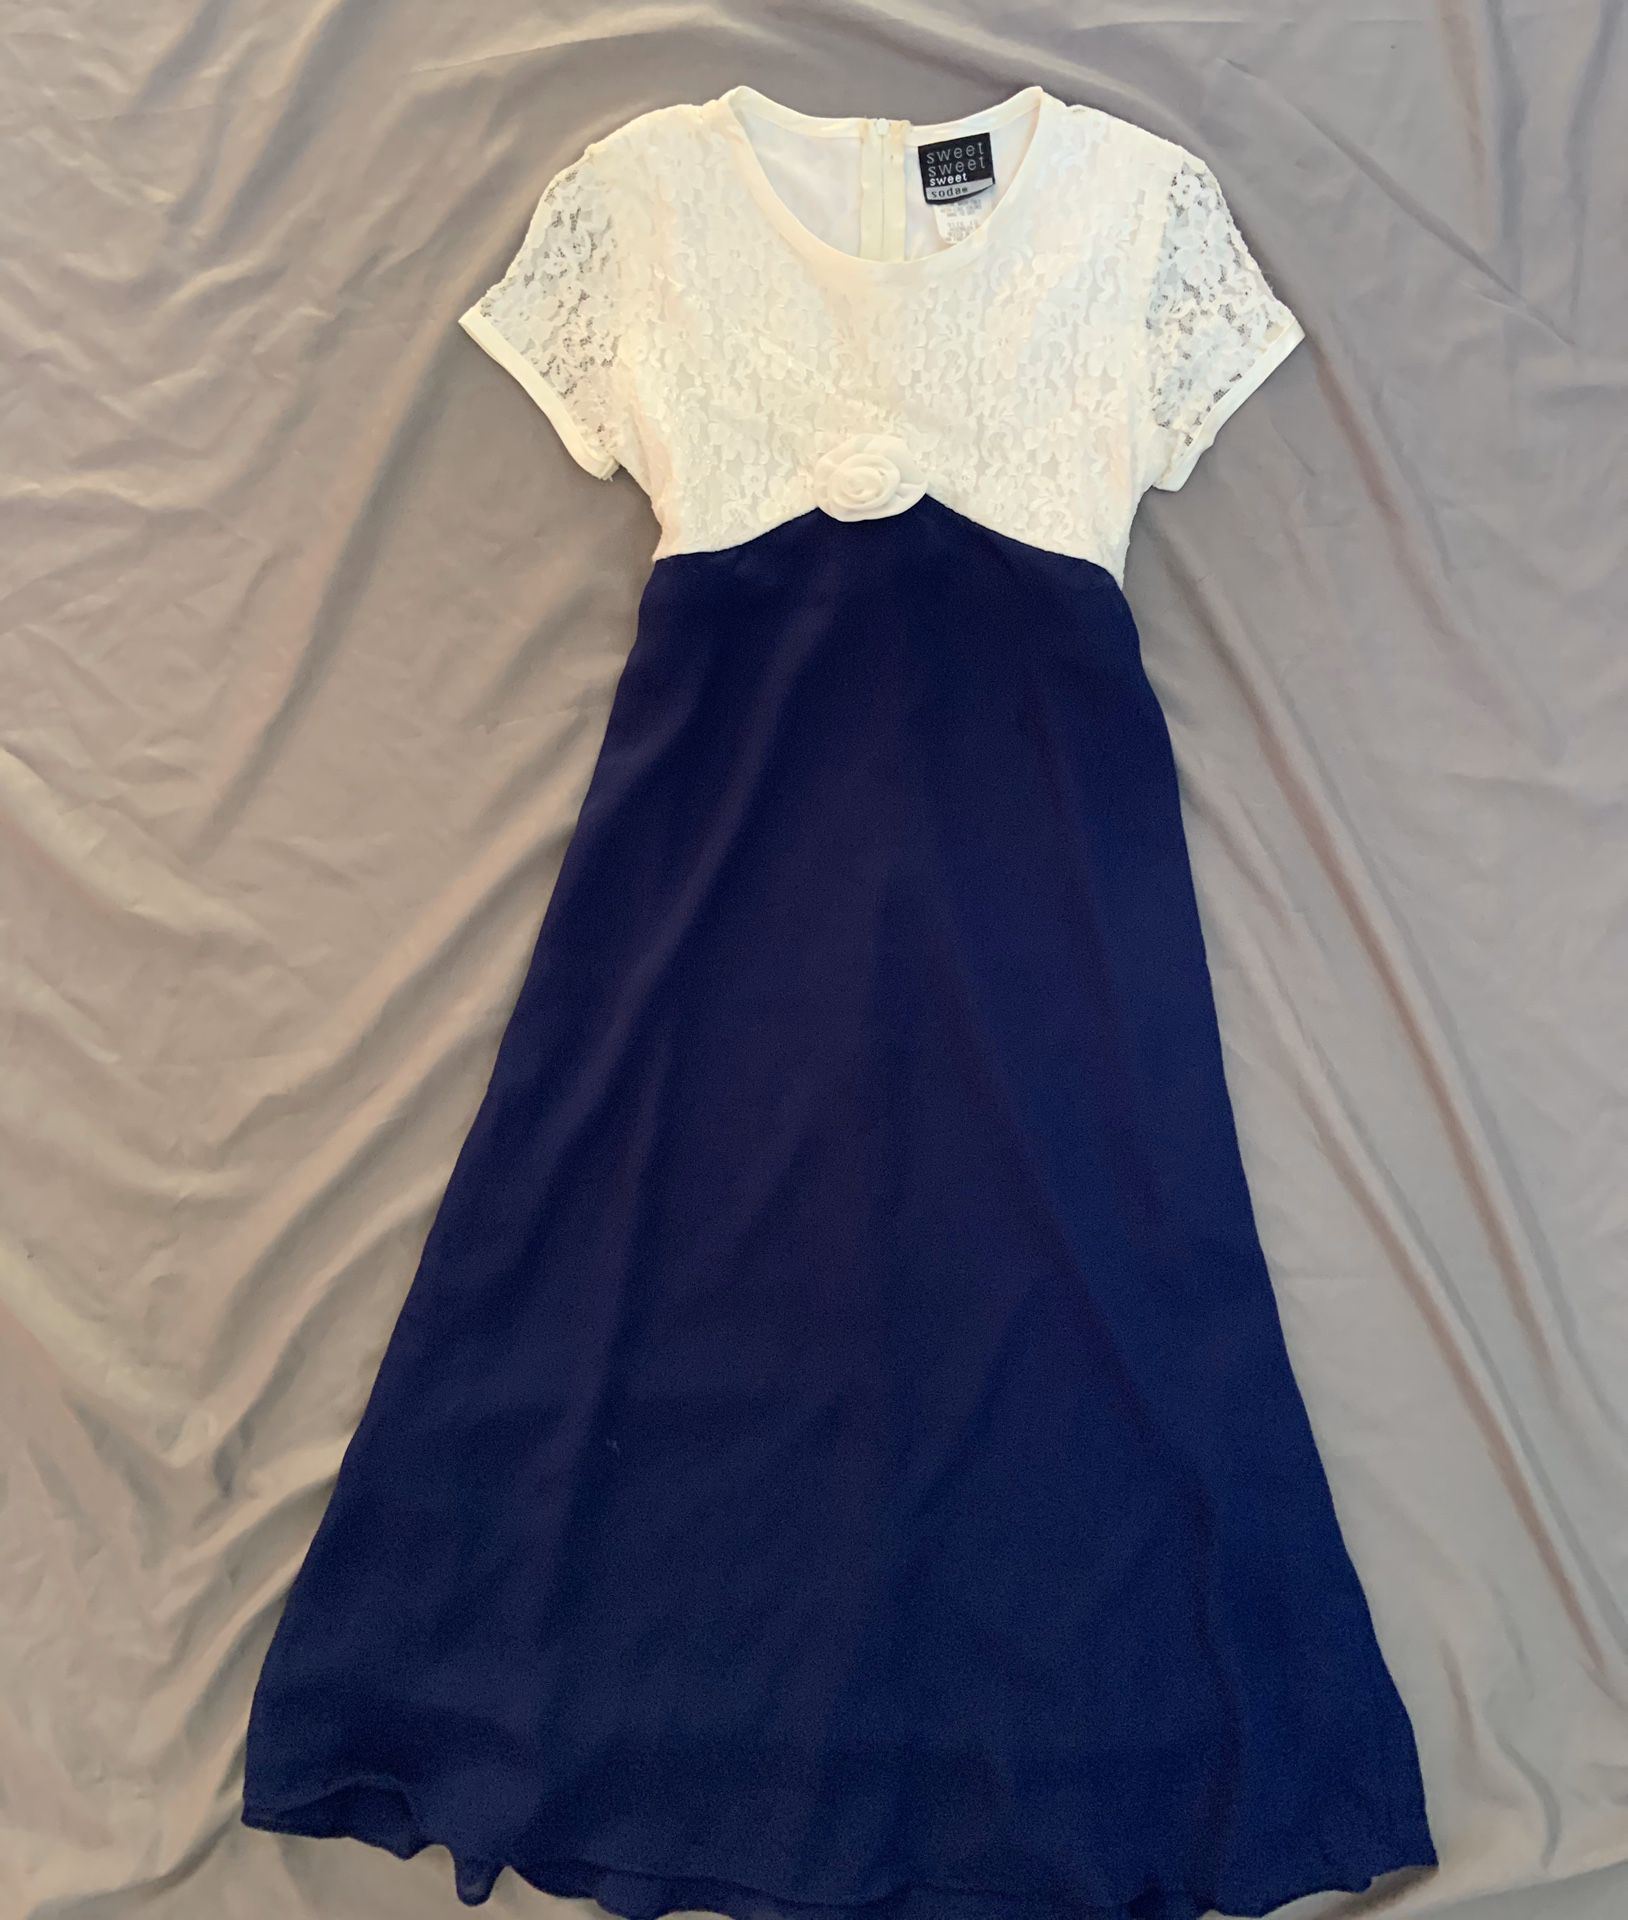 Girls Size 12 Cream and Blue Half Lace Dress w/ Flower